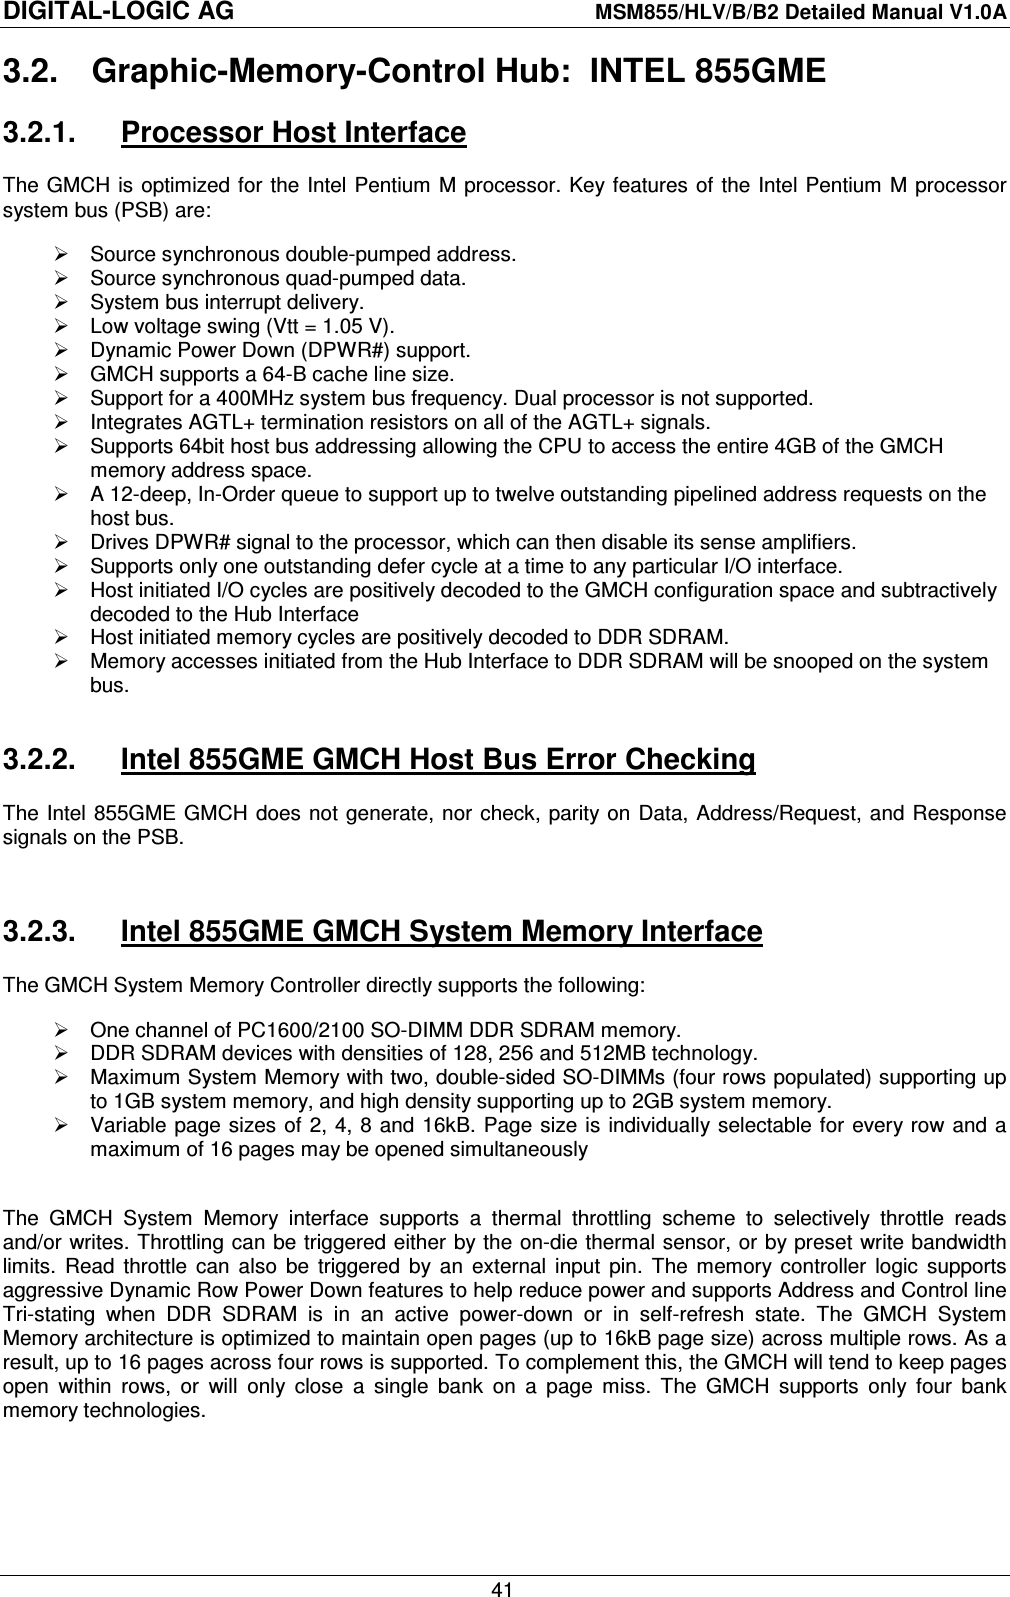 DIGITAL-LOGIC AG    MSM855/HLV/B/B2 Detailed Manual V1.0A    41 3.2.  Graphic-Memory-Control Hub:  INTEL 855GME 3.2.1.  Processor Host Interface The GMCH is optimized  for  the Intel Pentium M processor. Key features  of  the Intel Pentium  M processor system bus (PSB) are:   Source synchronous double-pumped address.   Source synchronous quad-pumped data.   System bus interrupt delivery.   Low voltage swing (Vtt = 1.05 V).   Dynamic Power Down (DPWR#) support.   GMCH supports a 64-B cache line size.   Support for a 400MHz system bus frequency. Dual processor is not supported.   Integrates AGTL+ termination resistors on all of the AGTL+ signals.   Supports 64bit host bus addressing allowing the CPU to access the entire 4GB of the GMCH memory address space.   A 12-deep, In-Order queue to support up to twelve outstanding pipelined address requests on the host bus.   Drives DPWR# signal to the processor, which can then disable its sense amplifiers.   Supports only one outstanding defer cycle at a time to any particular I/O interface.   Host initiated I/O cycles are positively decoded to the GMCH configuration space and subtractively decoded to the Hub Interface   Host initiated memory cycles are positively decoded to DDR SDRAM.   Memory accesses initiated from the Hub Interface to DDR SDRAM will be snooped on the system bus.  3.2.2.  Intel 855GME GMCH Host Bus Error Checking The Intel 855GME GMCH  does  not  generate, nor check, parity on Data,  Address/Request, and Response signals on the PSB.  3.2.3.  Intel 855GME GMCH System Memory Interface The GMCH System Memory Controller directly supports the following:   One channel of PC1600/2100 SO-DIMM DDR SDRAM memory.   DDR SDRAM devices with densities of 128, 256 and 512MB technology.   Maximum System Memory with two, double-sided SO-DIMMs (four rows populated) supporting up to 1GB system memory, and high density supporting up to 2GB system memory.   Variable page sizes of  2, 4, 8 and 16kB. Page  size is individually selectable for every row  and  a maximum of 16 pages may be opened simultaneously  The  GMCH  System  Memory  interface  supports  a  thermal  throttling  scheme  to  selectively  throttle  reads and/or writes. Throttling can be triggered either by the on-die thermal sensor, or by preset write bandwidth limits.  Read  throttle  can  also  be  triggered  by  an  external  input  pin.  The  memory  controller  logic  supports aggressive Dynamic Row Power Down features to help reduce power and supports Address and Control line Tri-stating  when  DDR  SDRAM  is  in  an  active  power-down  or  in  self-refresh  state.  The  GMCH  System Memory architecture is optimized to maintain open pages (up to 16kB page size) across multiple rows. As a result, up to 16 pages across four rows is supported. To complement this, the GMCH will tend to keep pages open  within  rows,  or  will  only  close  a  single  bank  on  a  page  miss.  The  GMCH  supports  only  four  bank memory technologies.  